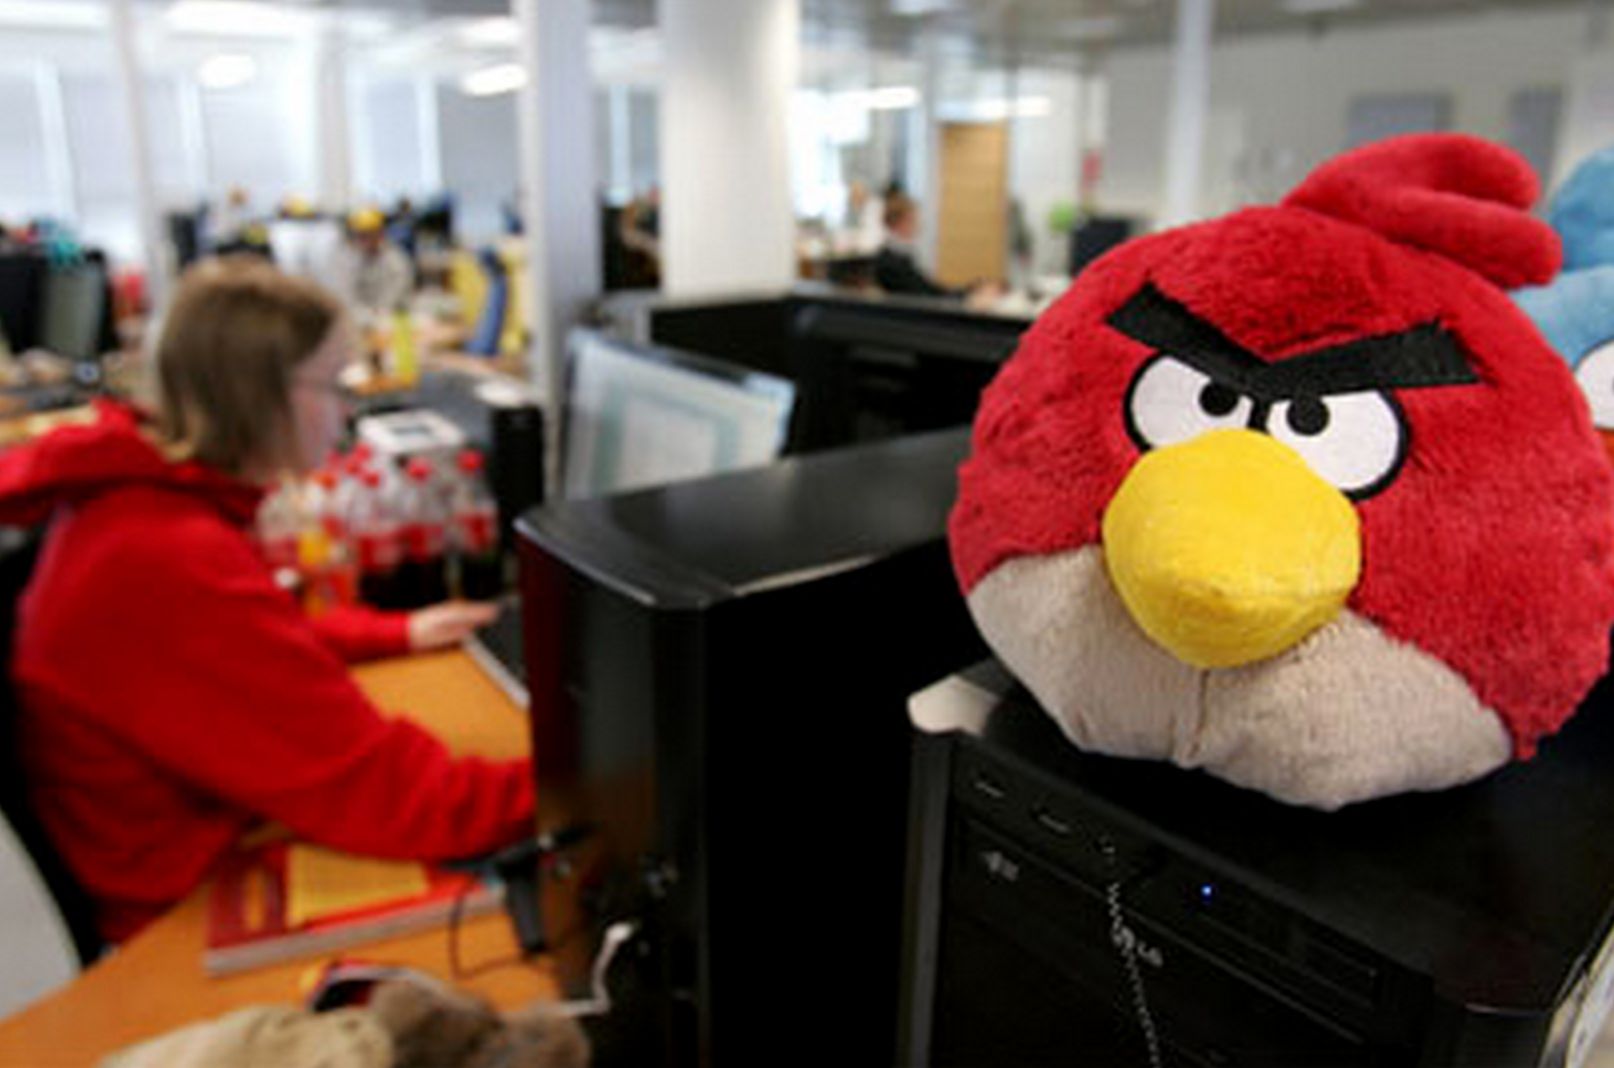 angry birds celebrates 5 years these are the defining moments image 3